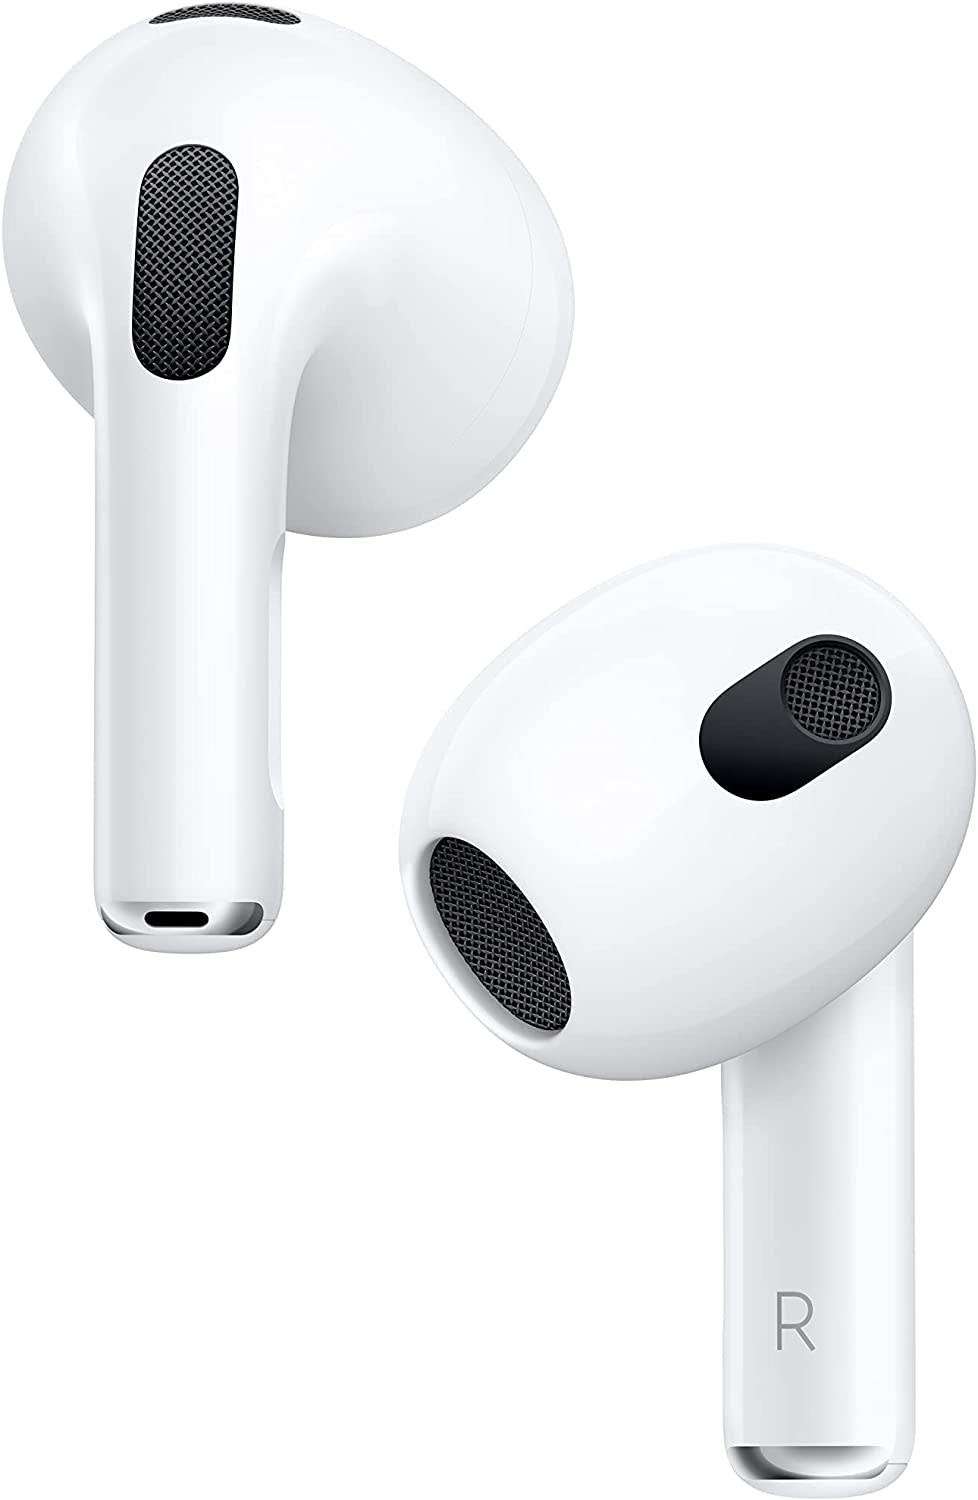 New Apple AirPods (3rd Generation), gifts for mom